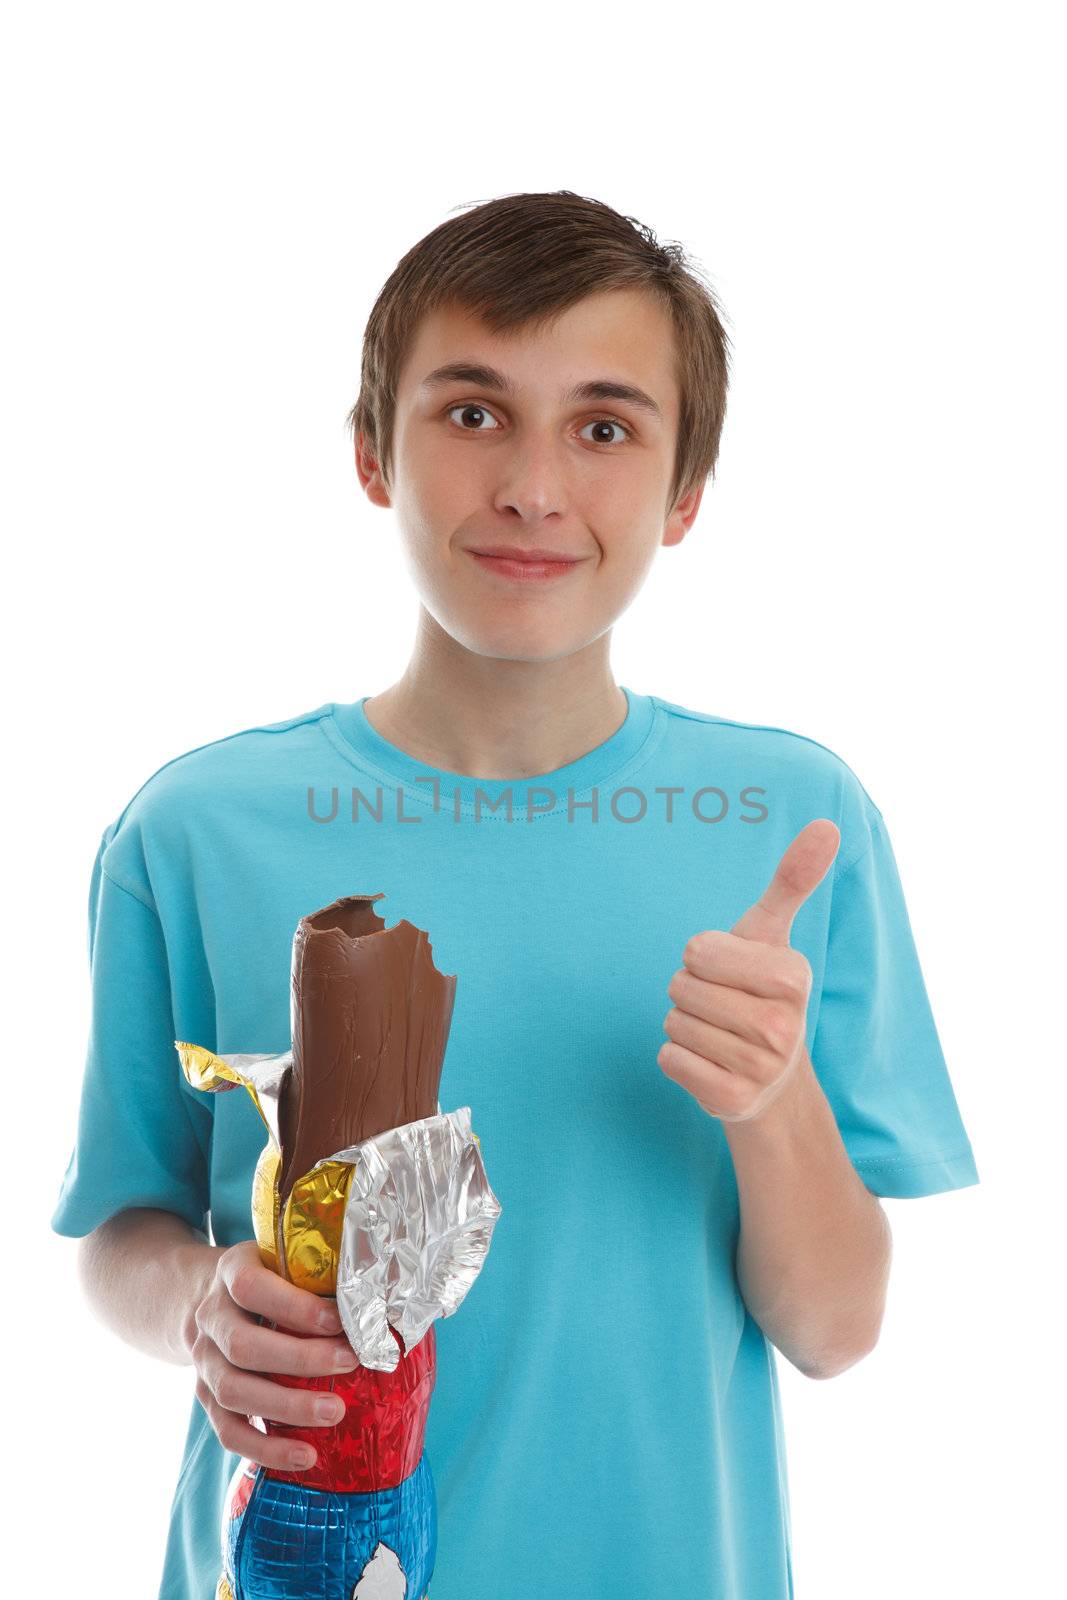 A boy wearing a blue shirt eating a delicious milk chocolate rabbit and showing a thumbs up sign of approval ir satusfaction.